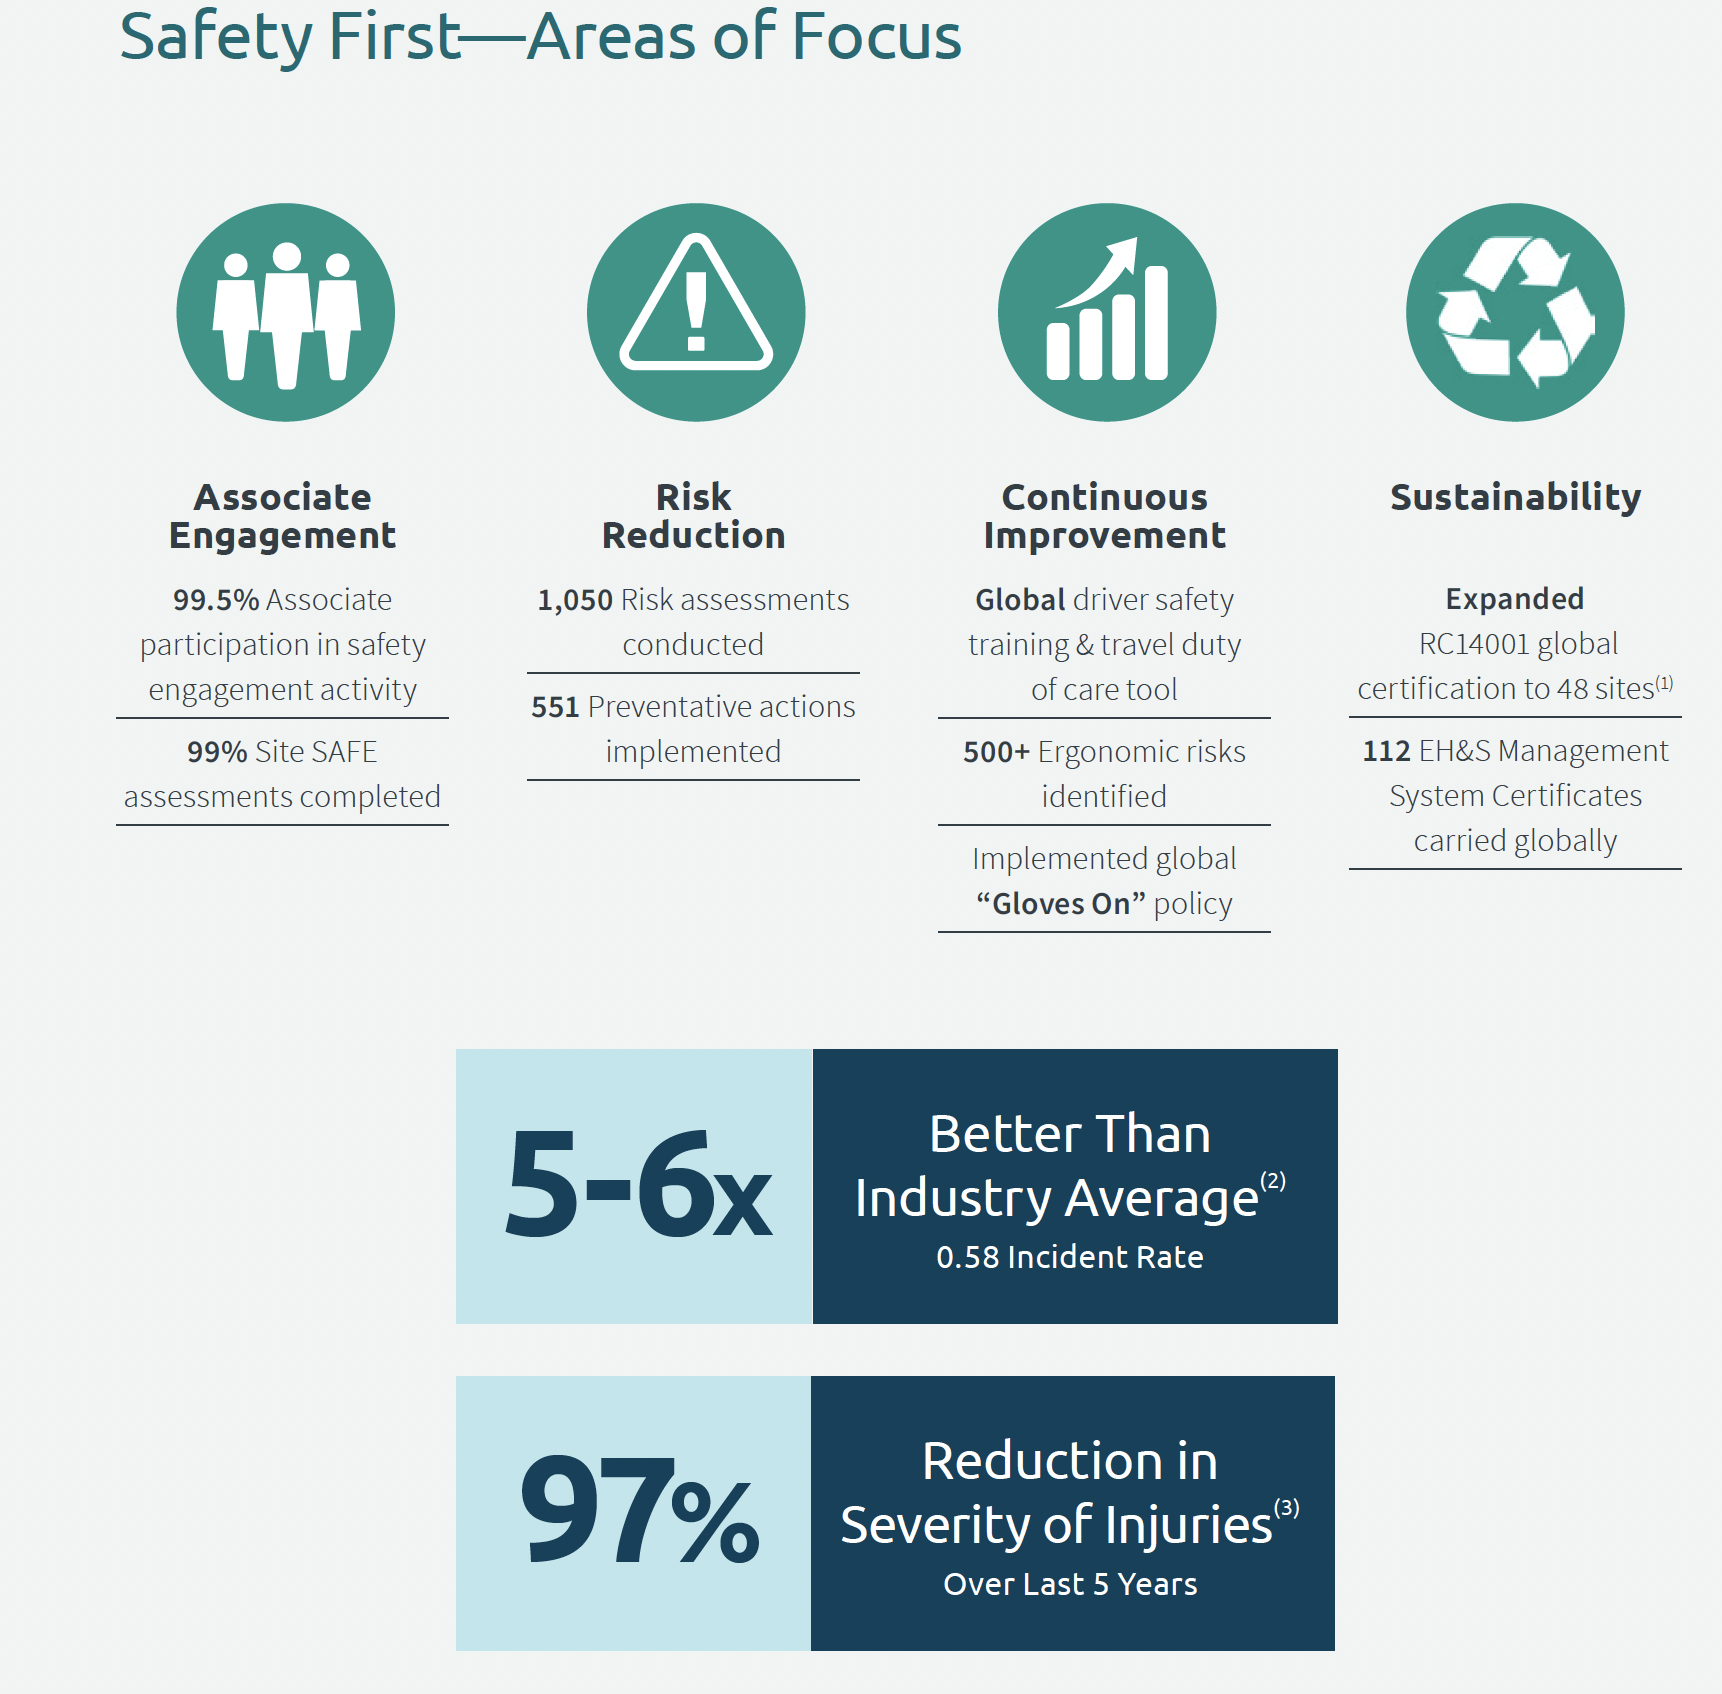 Safety First Areas of Focus